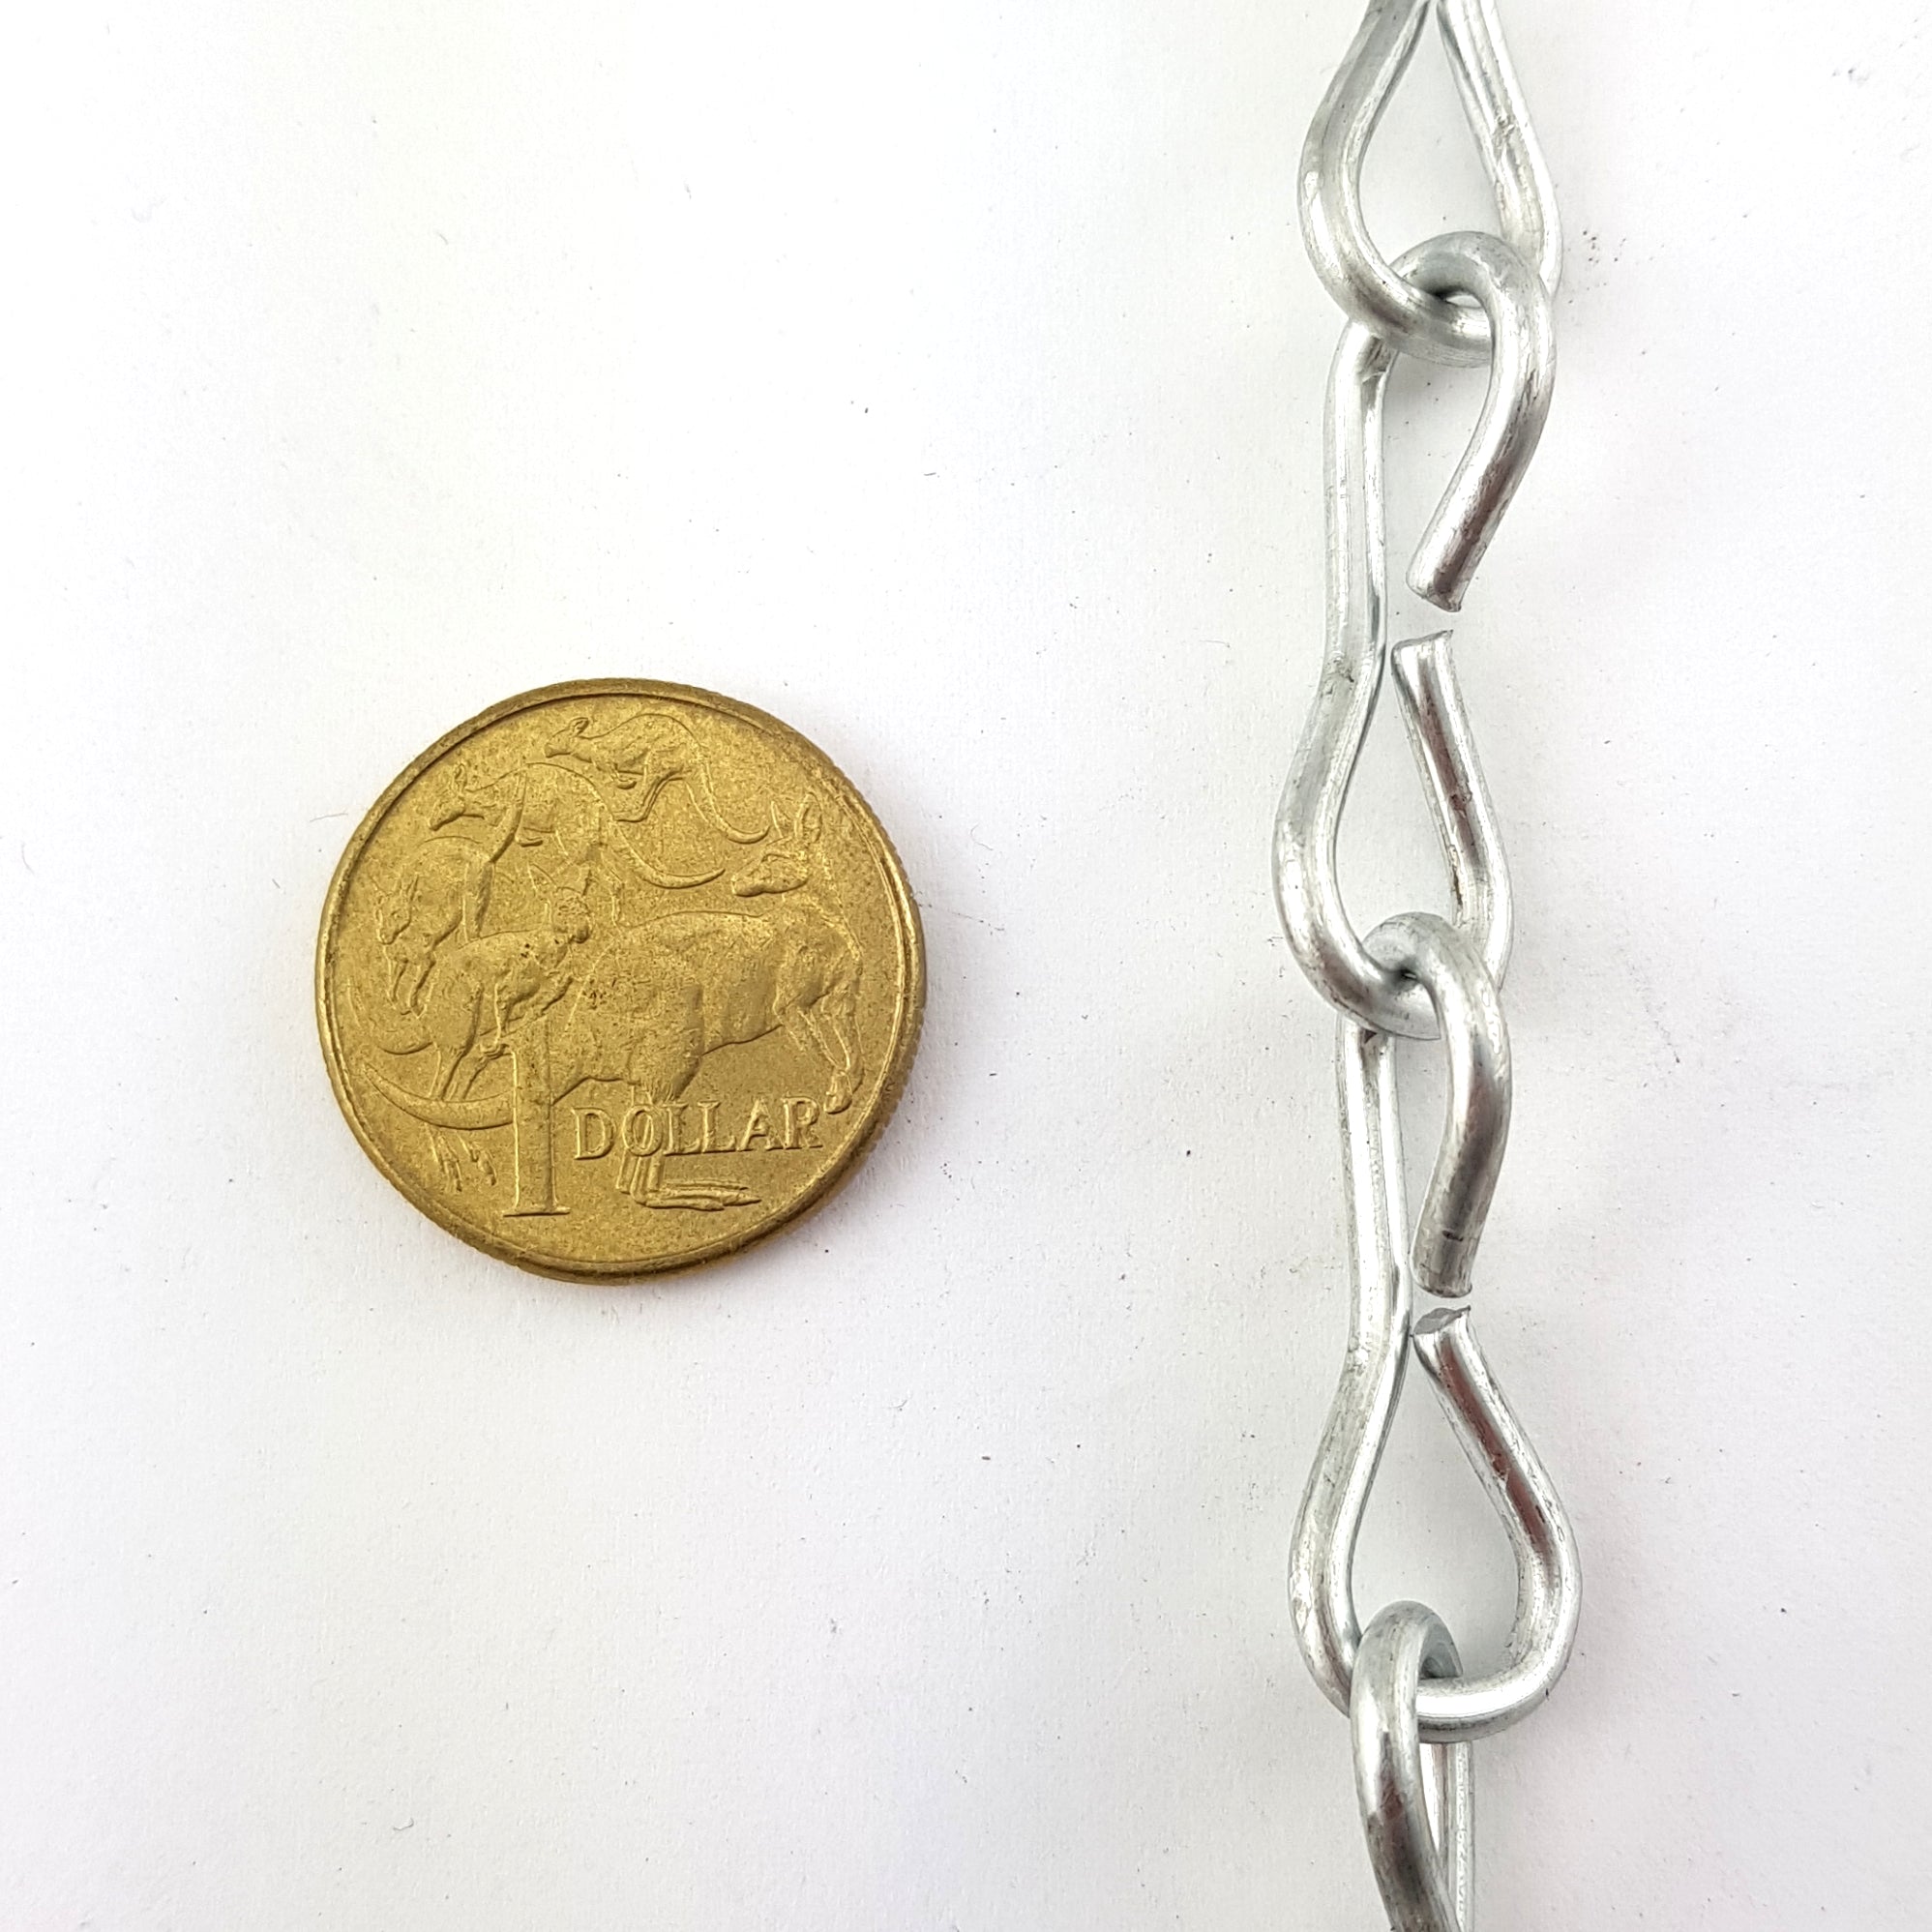 Australian made Single Jack Chain in galvanised finish, size 2.5mm and quantity of 125 metres. Melbourne, Australia.